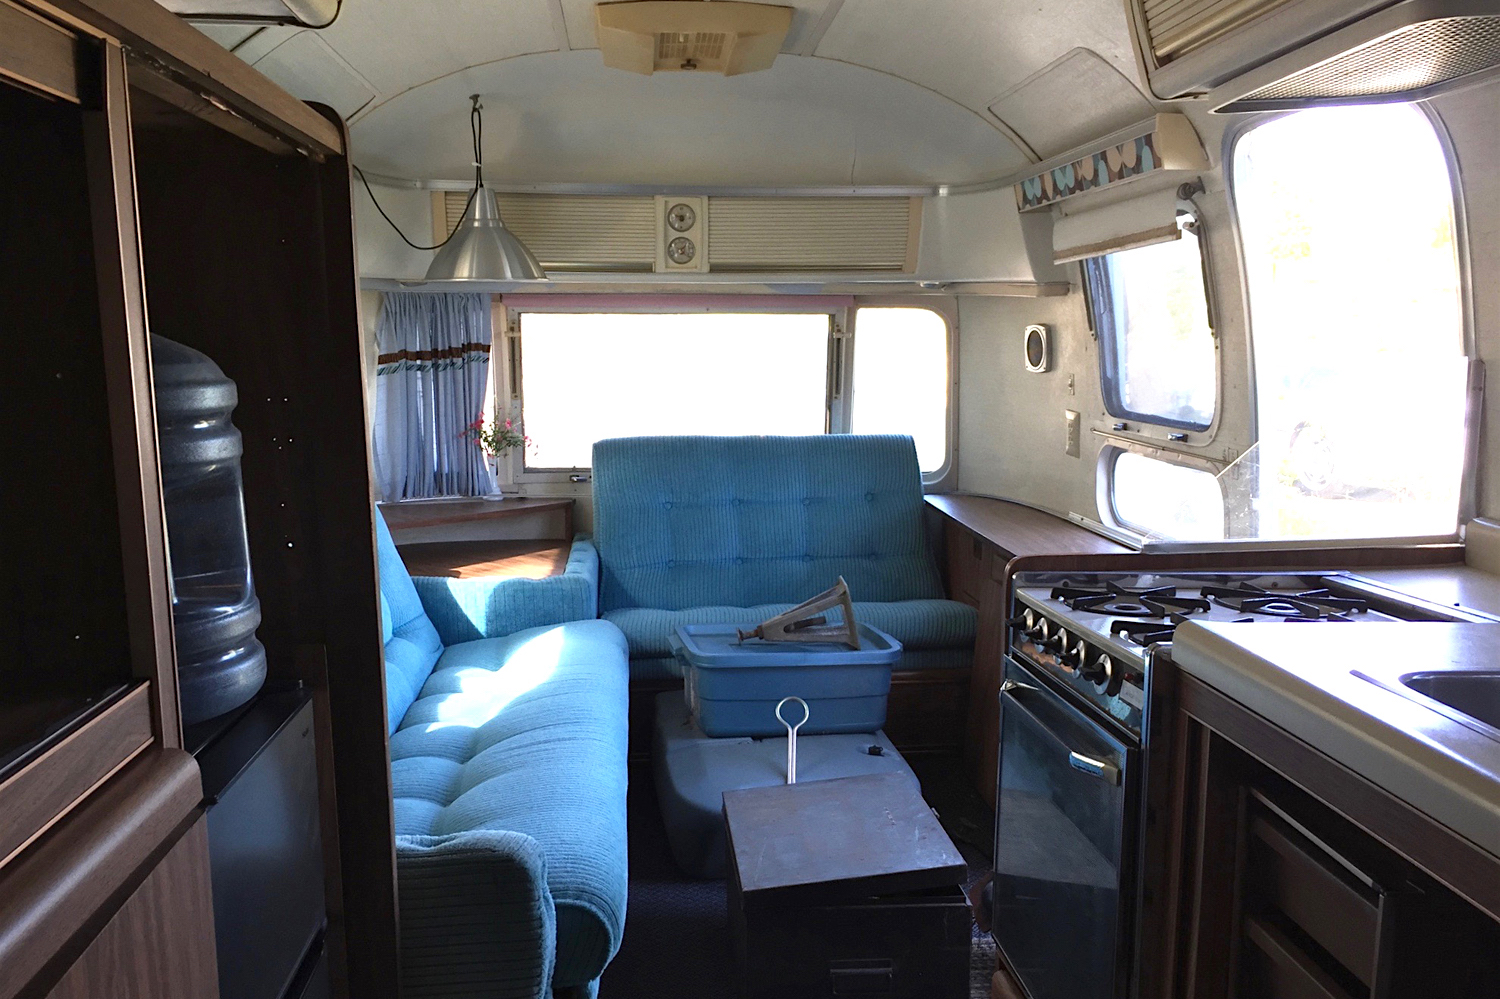 The before photo of a 1976 vintage airstream, transformed with white paint, gold accents and gorgeous home decor. A must see! Click on the photo to see more. Airstream by Lynne Knowlton from Design The Life You Want to Live www.lynneknowlton.com